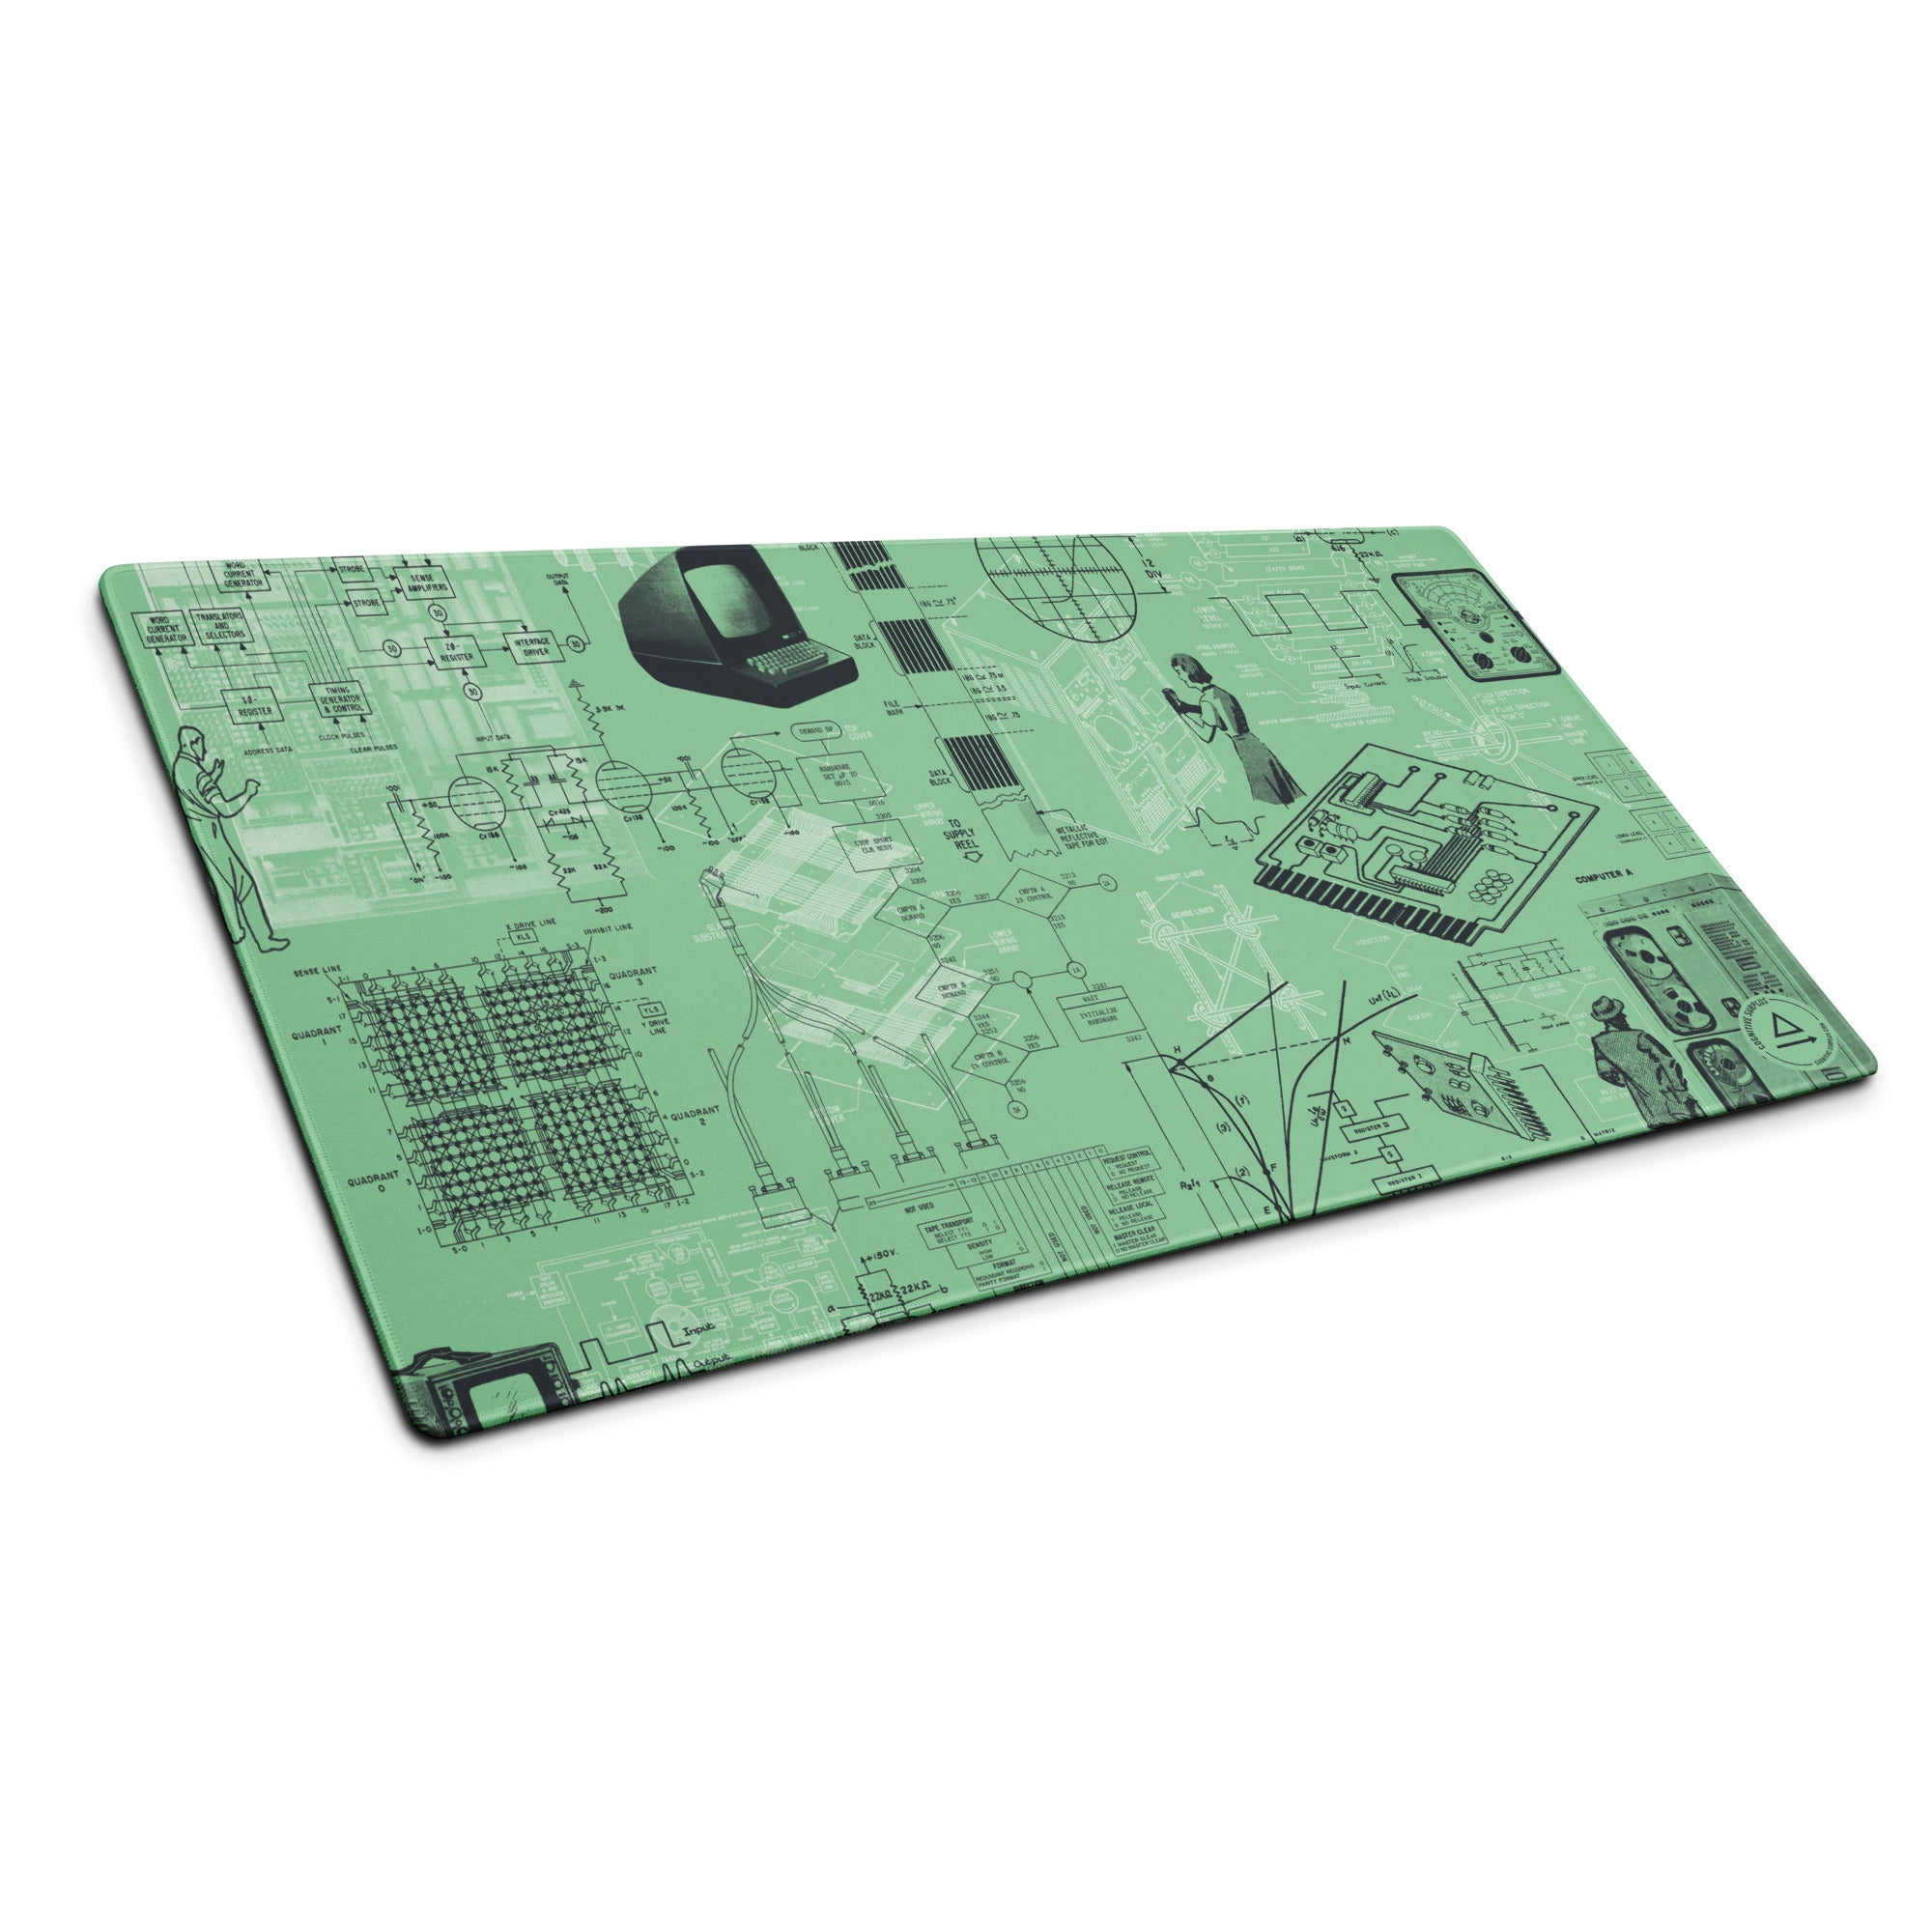 Early Computers Gaming Mouse Pad